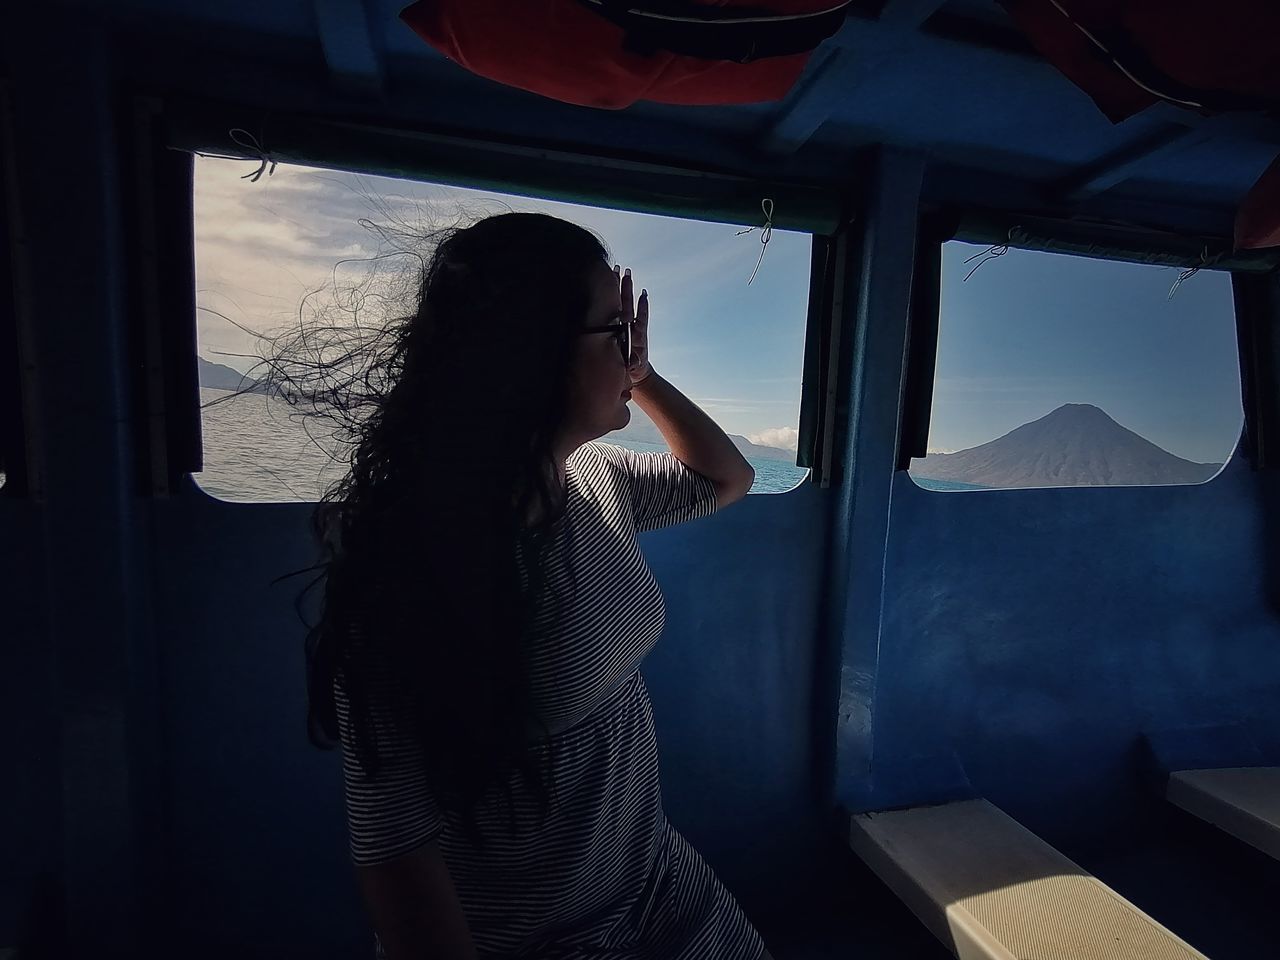 one person, adult, window, women, blue, transportation, mode of transportation, indoors, long hair, looking, young adult, travel, hairstyle, nature, side view, darkness, lifestyles, waist up, black, light, looking through window, vehicle, casual clothing, sky, three quarter length, vehicle interior, contemplation, screenshot, journey